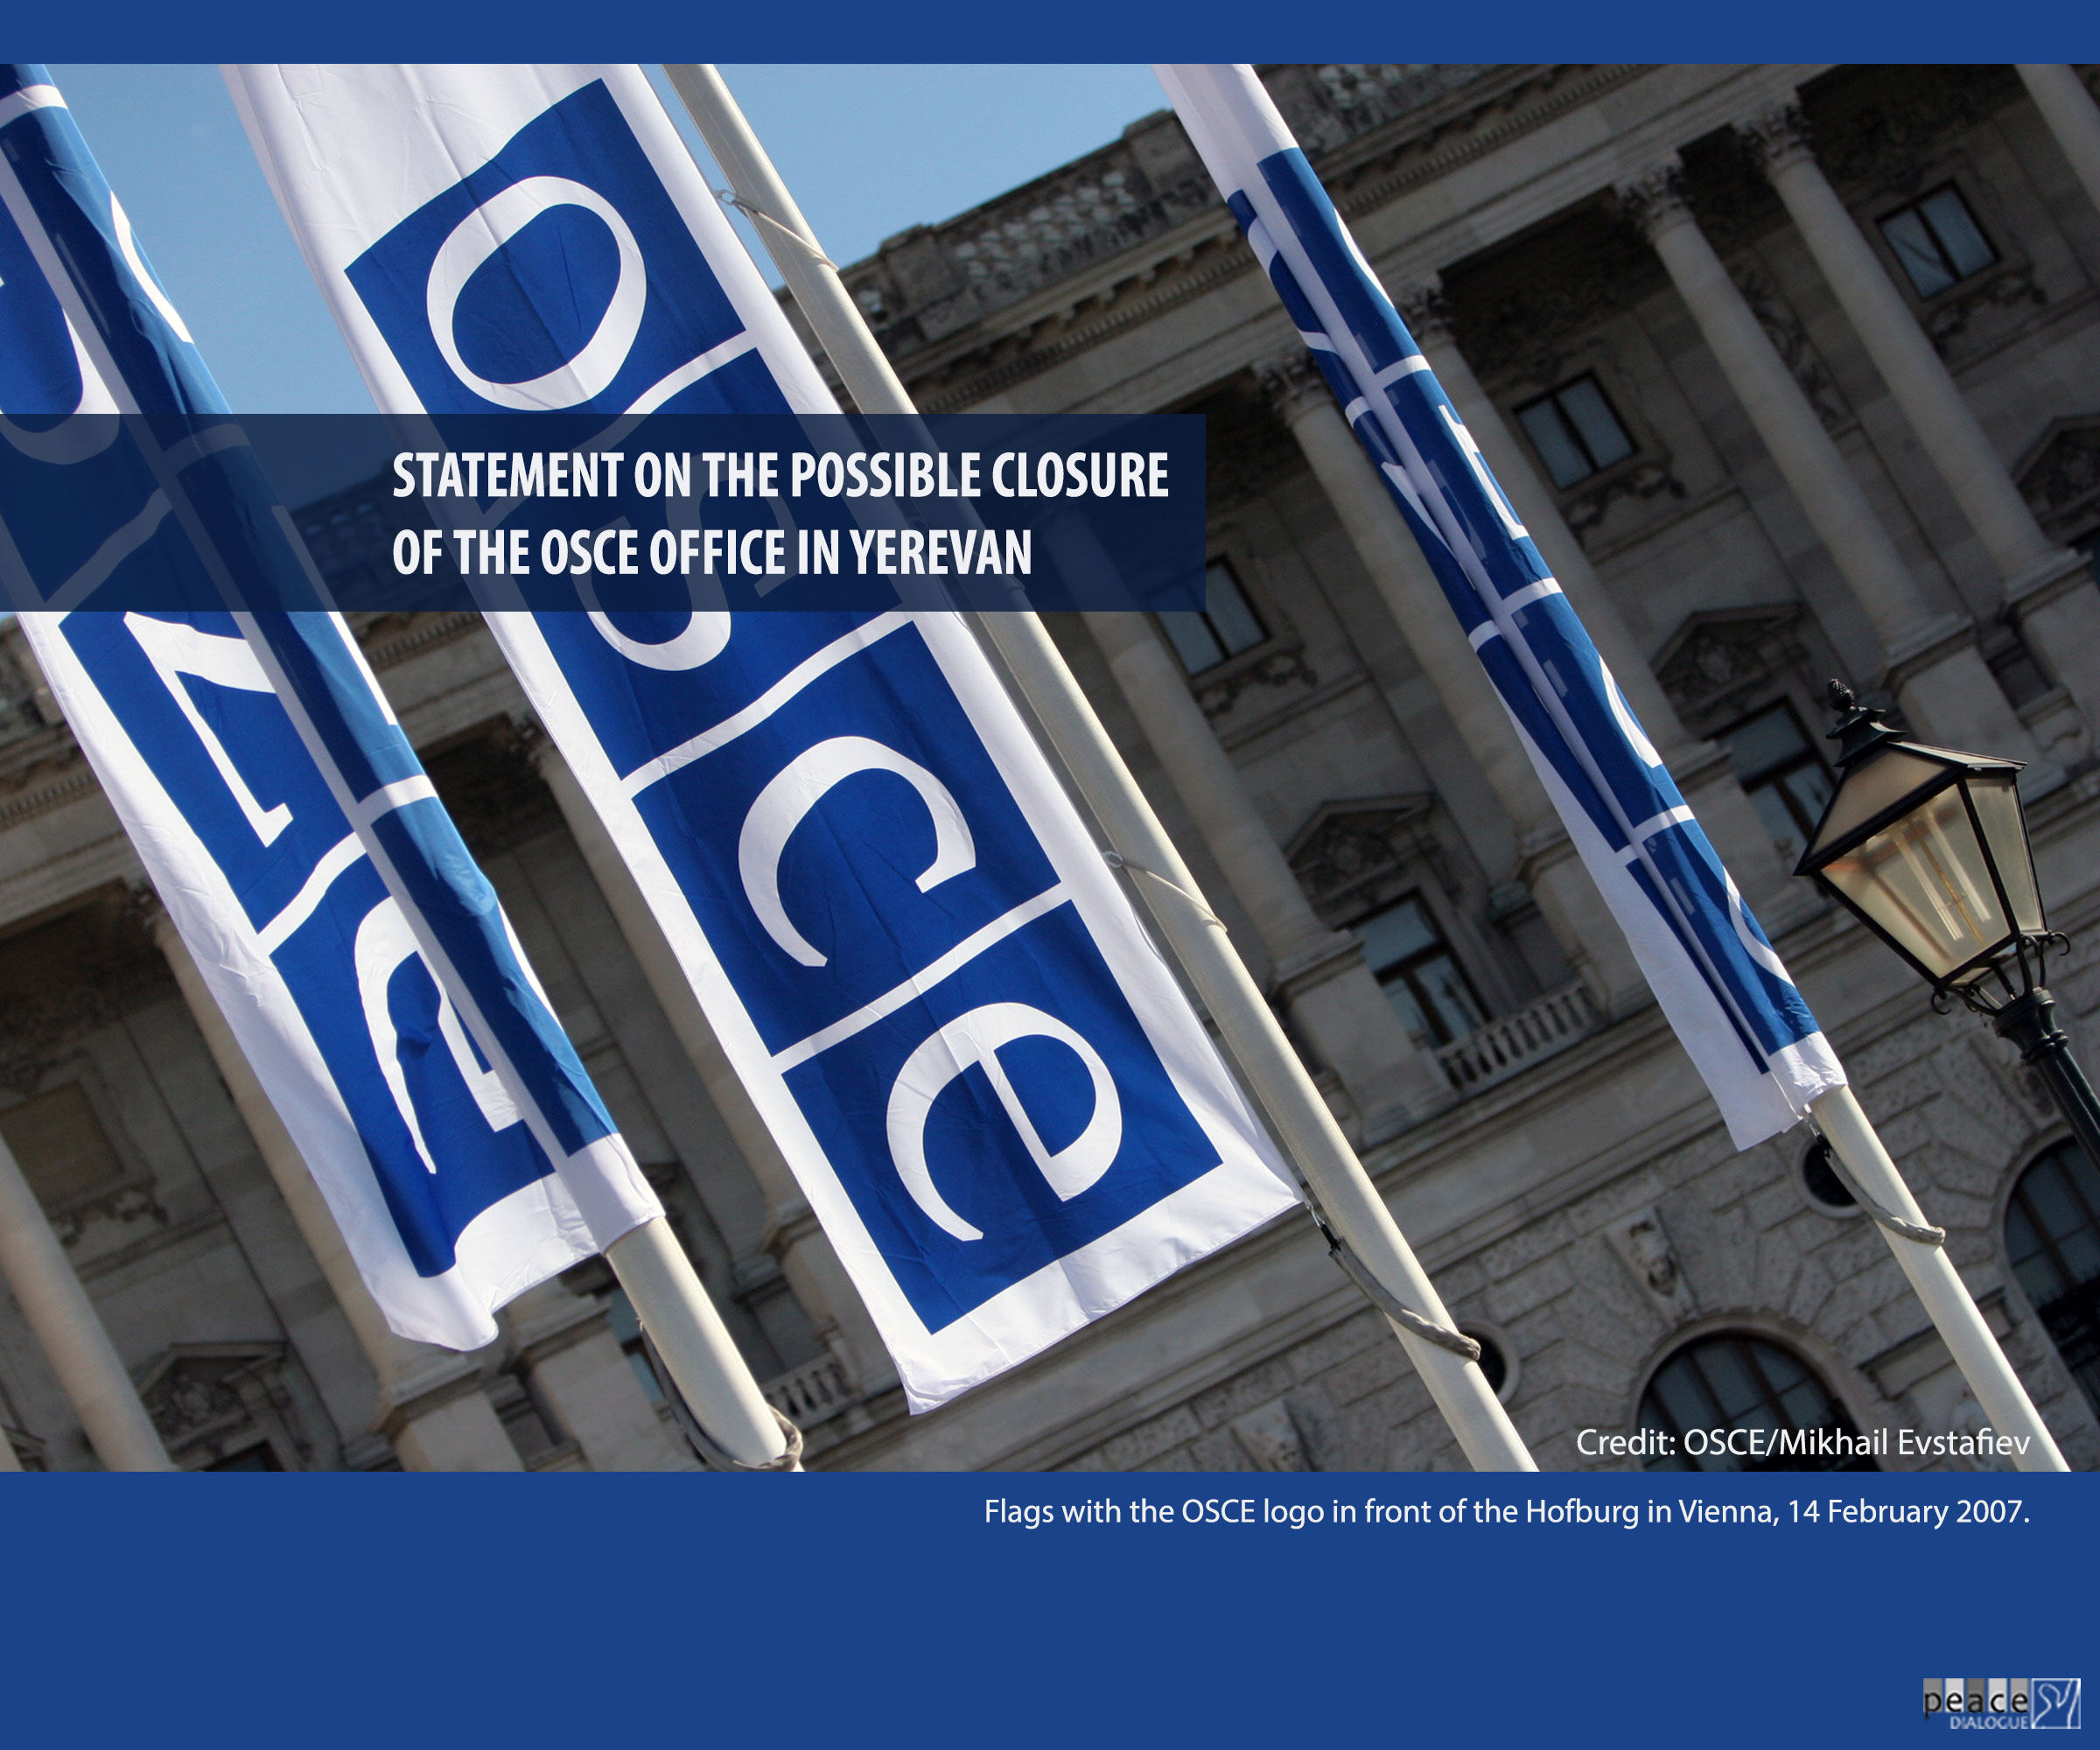 On the Possible Closure of the OSCE Office in Yerevan